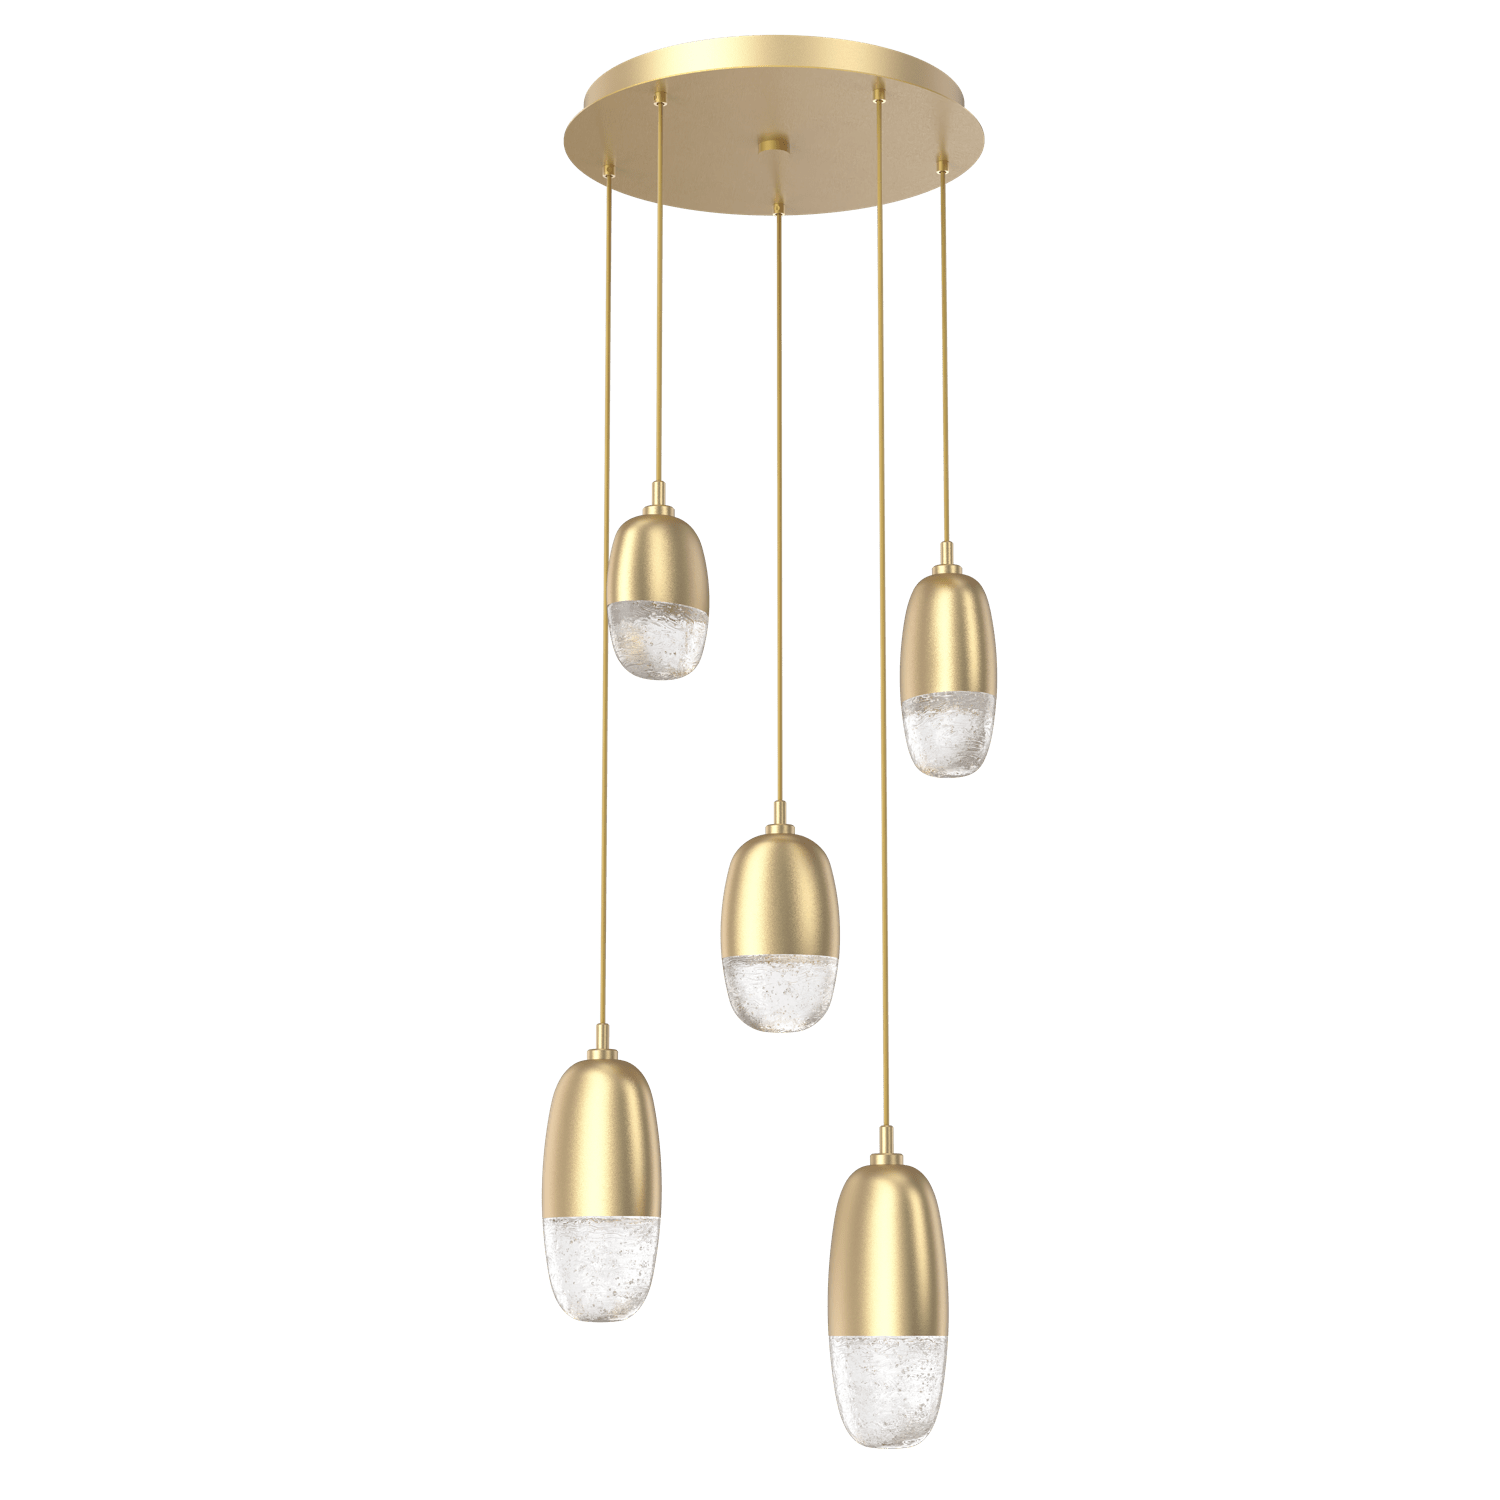 CHB0079-05-GB-Hammerton-Studio-Pebble-5-light-round-pendant-chandelier-with-gilded-brass-finish-and-clear-cast-glass-shades-and-LED-lamping